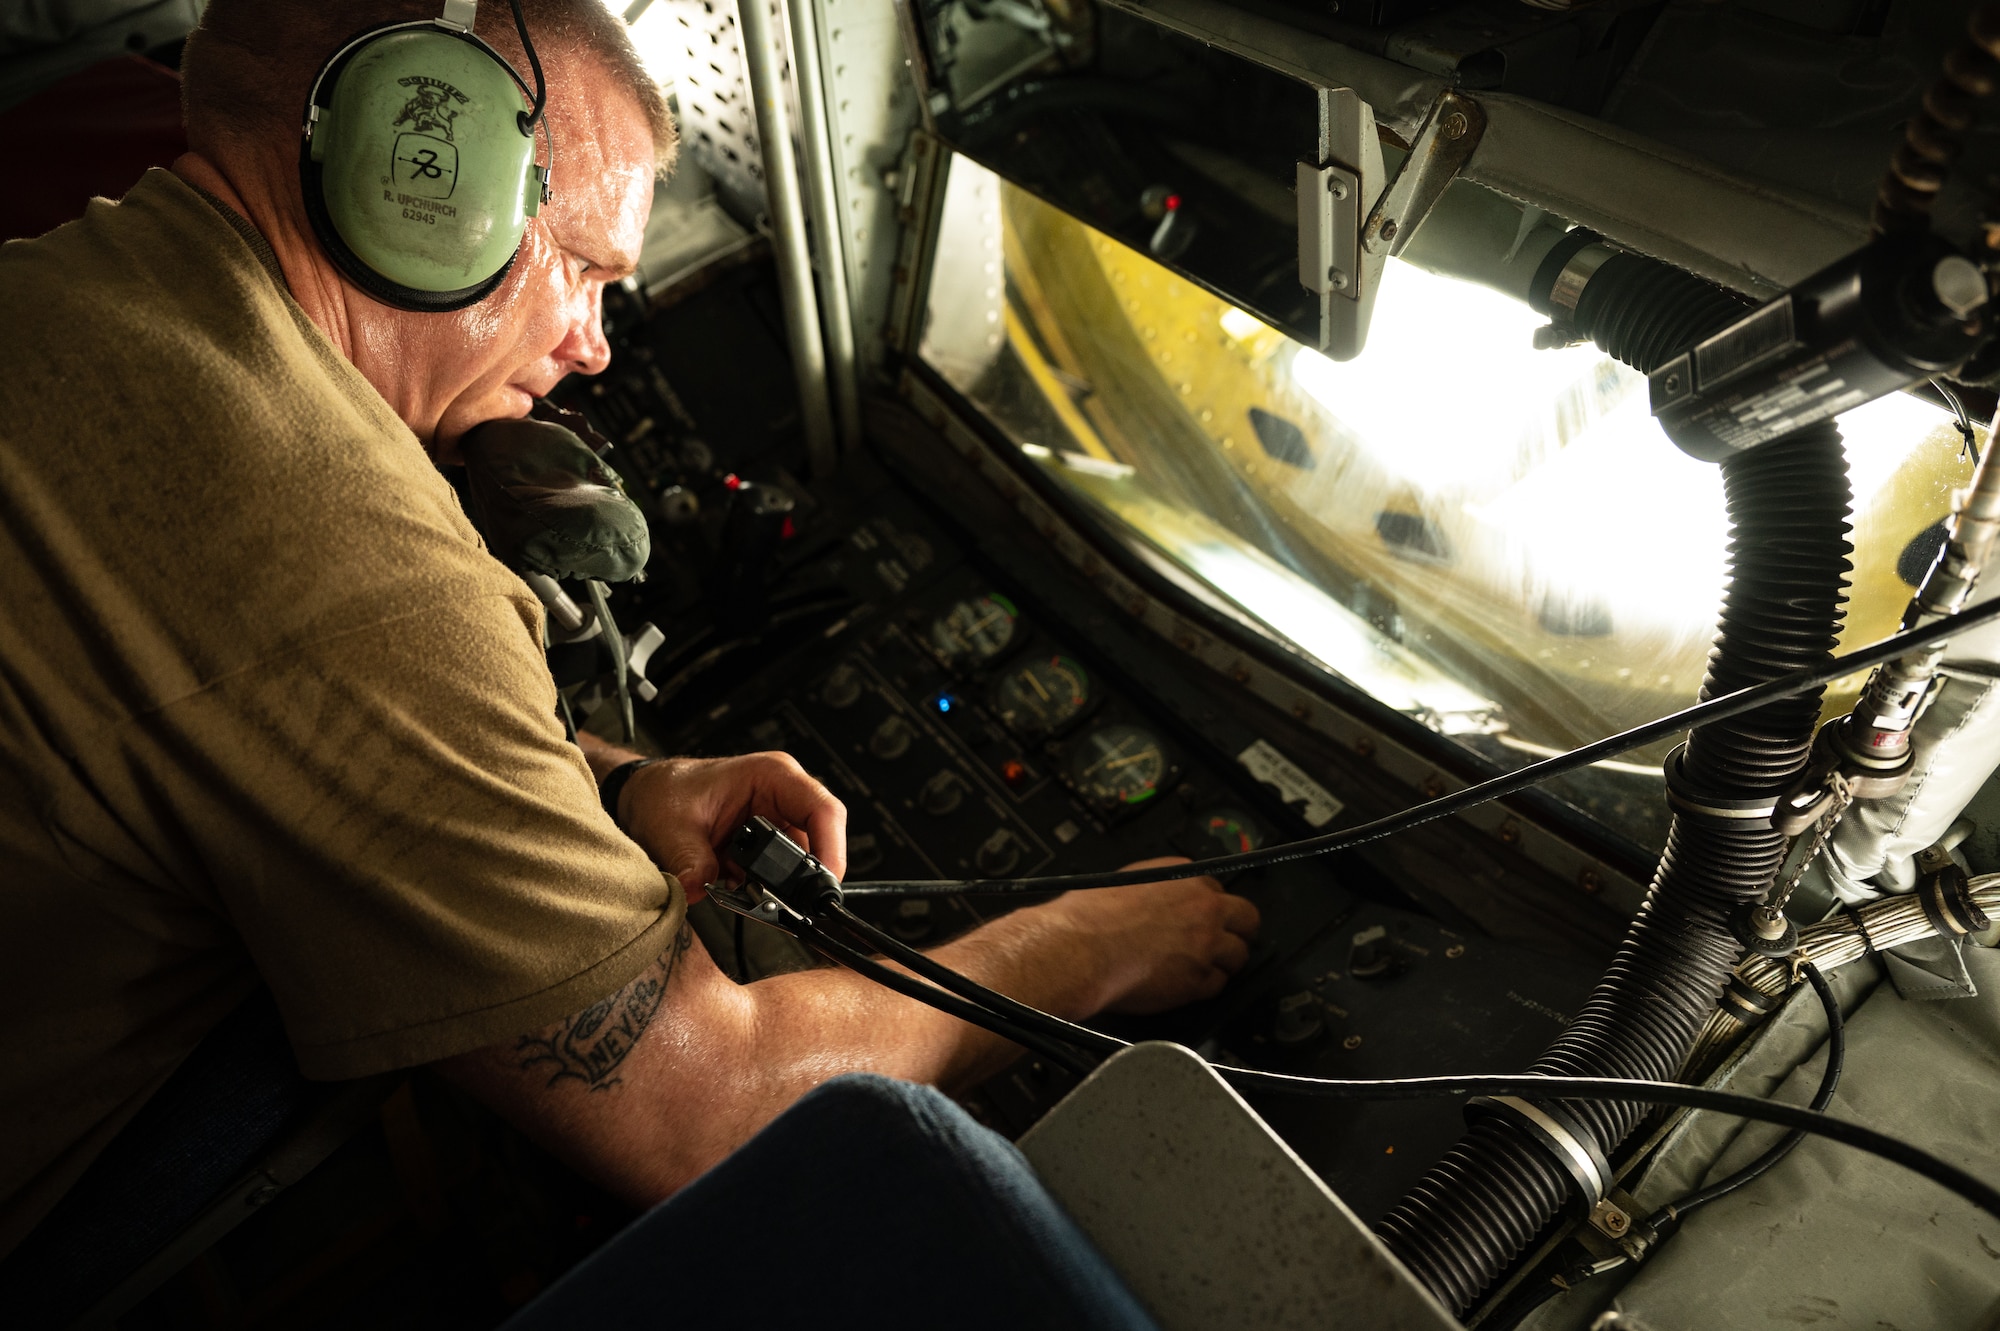 U.S. Air Force Col. Randy D. Schwinler, Commander 379th Expeditionary Maintenance Group, Al Udeid Air Base, Qatar, conducts a pre-flight check on a KC-135 Stratotanker, July 9, 2022. Schwinler checked the boom operations radio and control panel functionality while laying down in a pit located in the tail of the aircraft.  (U.S. Air Force photo by Staff Sgt. Dana Tourtellotte)